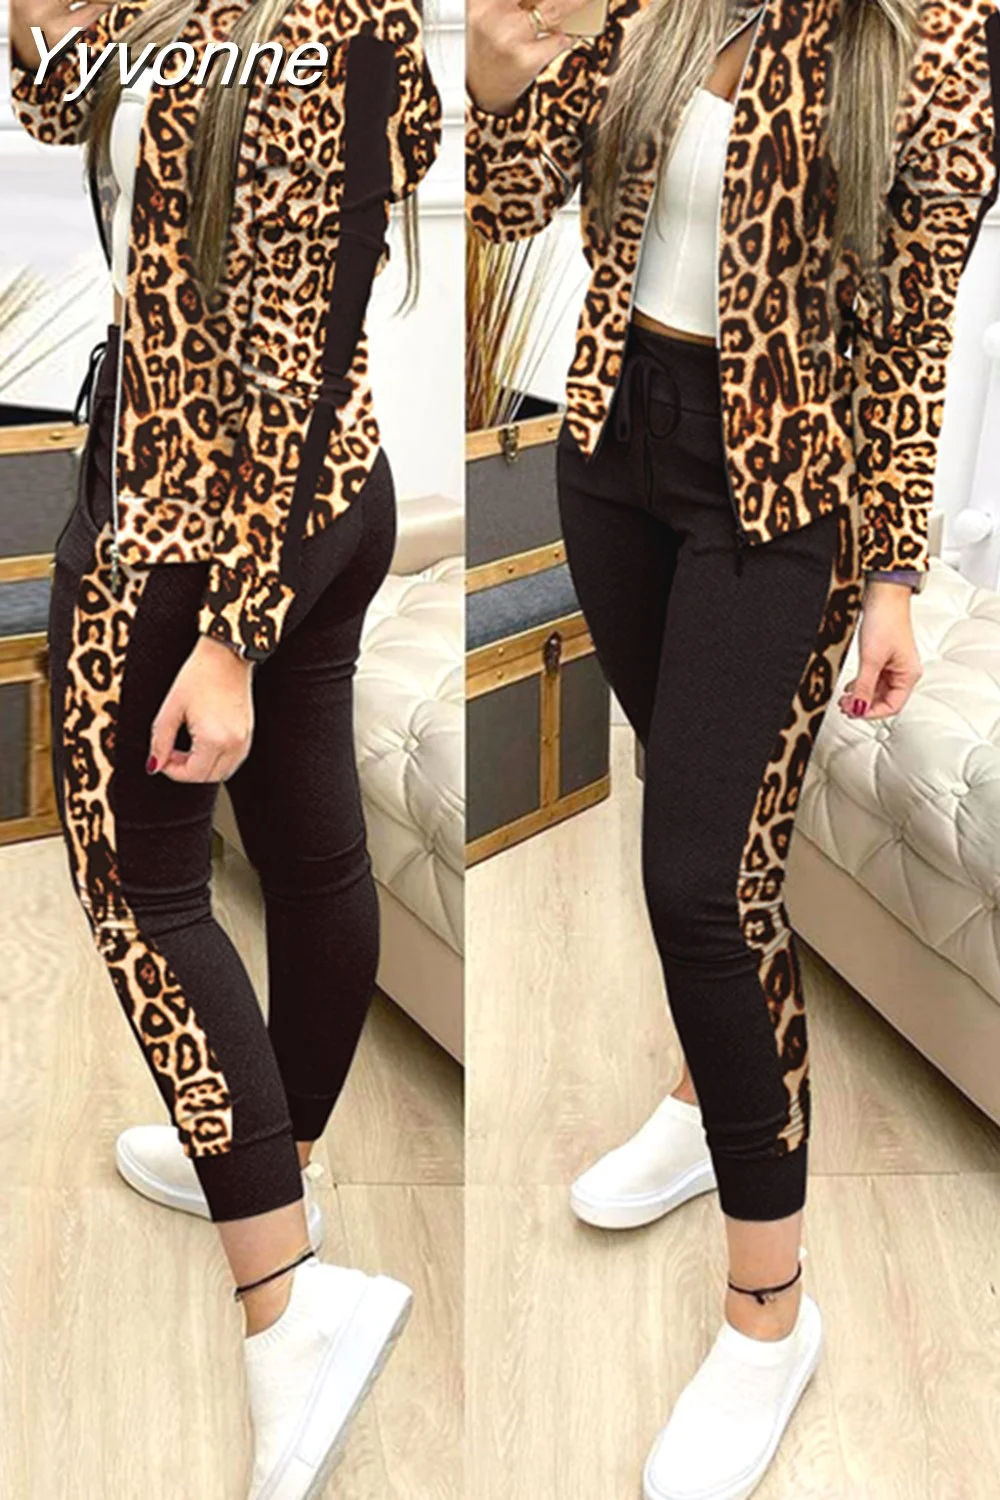 Yyvonne Leopard 2 Two Piece Set Women Outfits Activewear Zipper Top Leggings Women Matching Set Tracksuit Female Outfits for Women